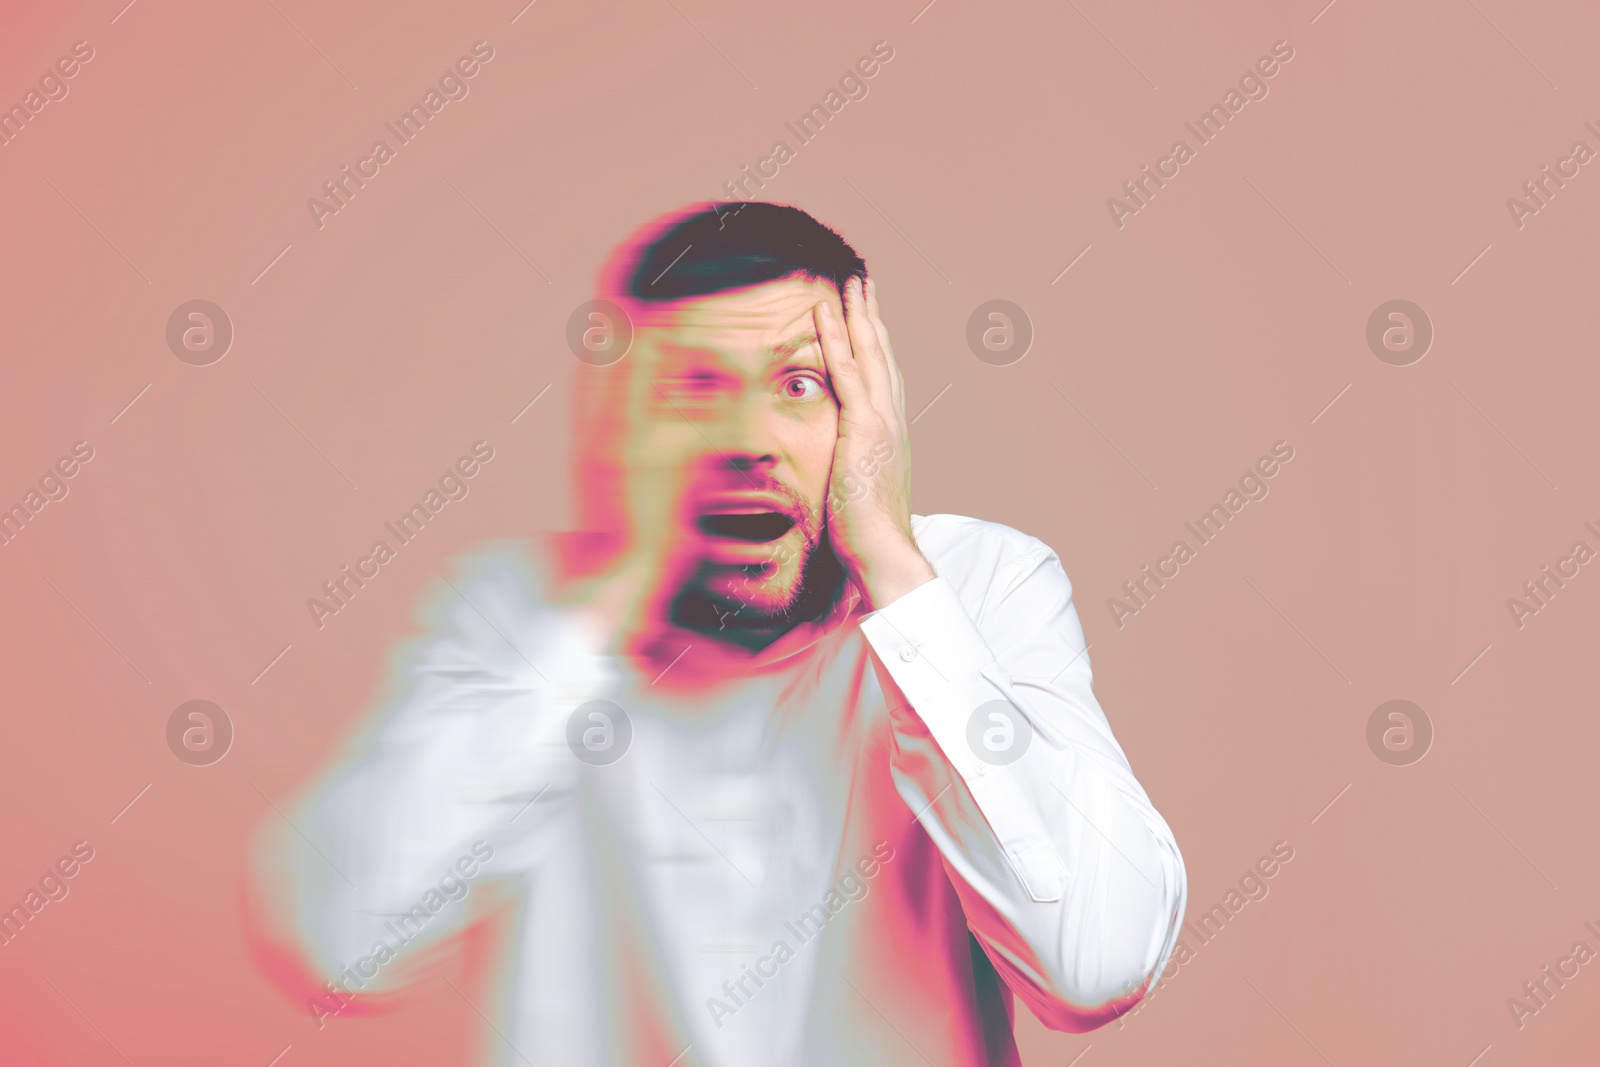 Image of Man suffering from paranoia on light coral background, glitch effect